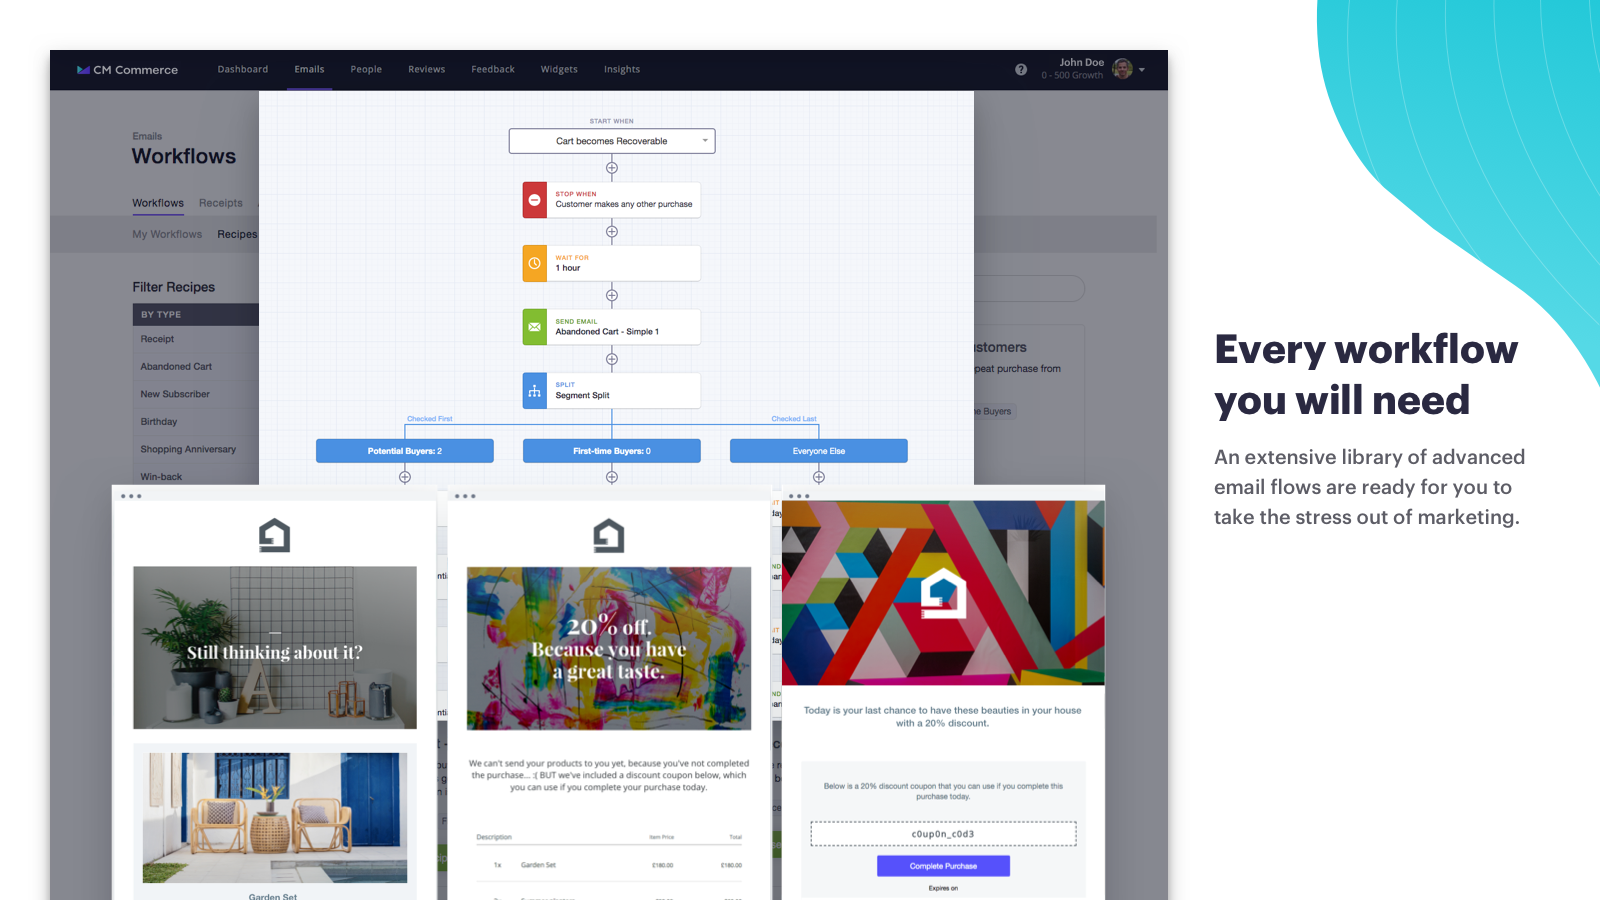 A visual email workflow editor to automate any email campaign.